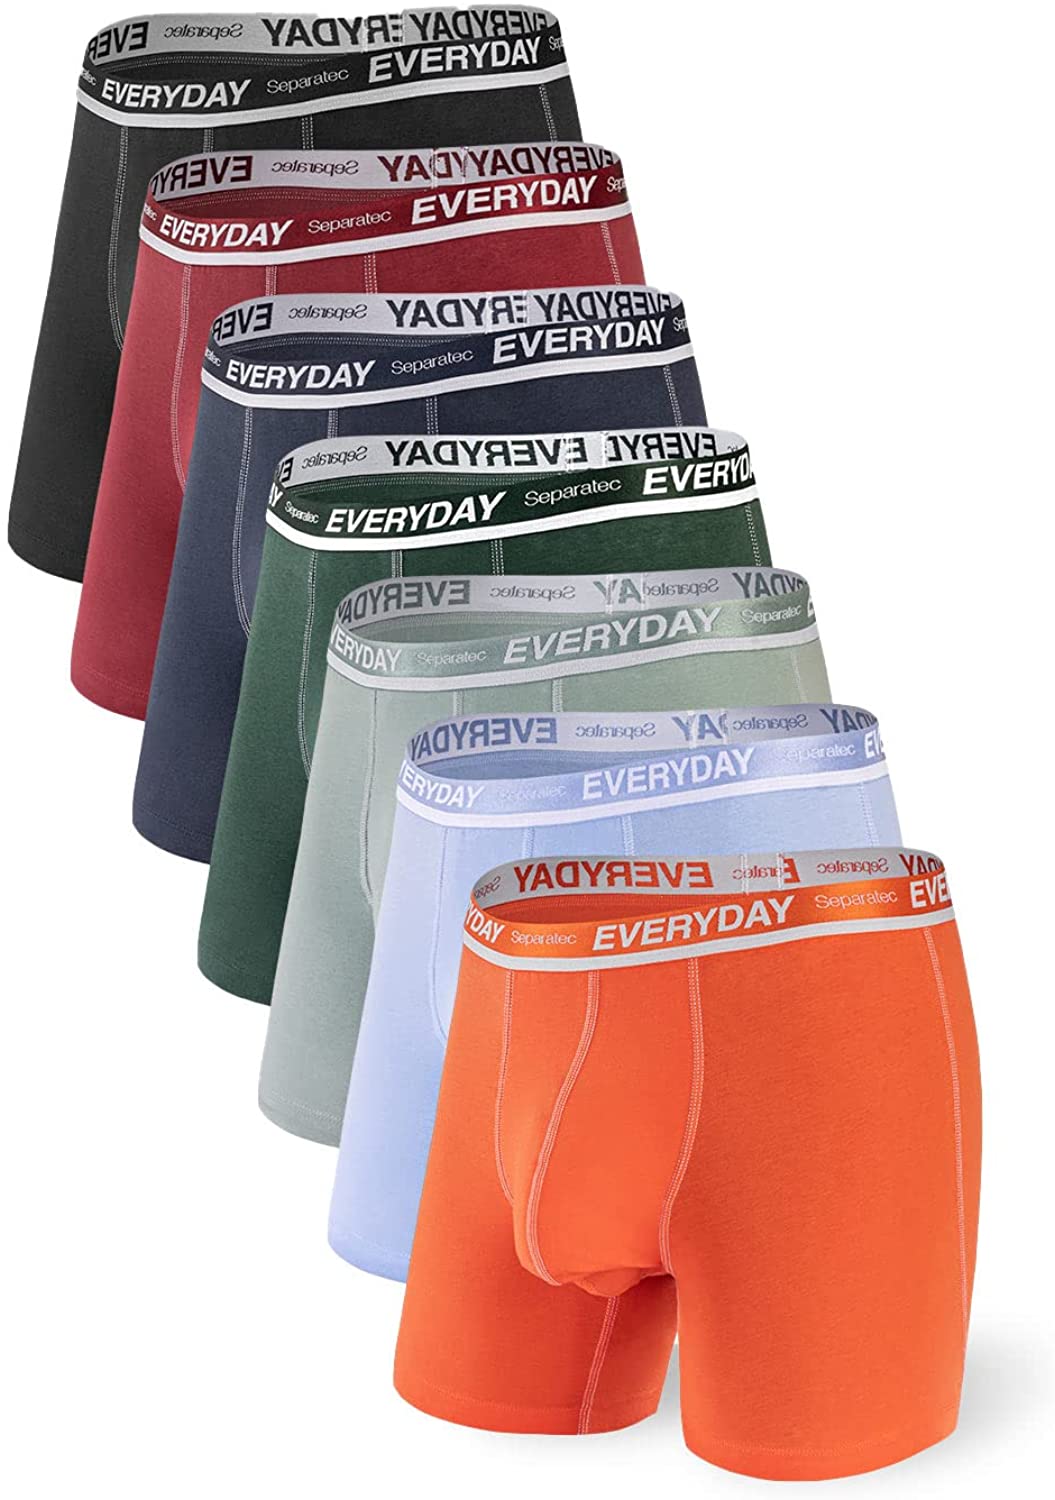 Men's 7 Pack Breathable Cotton Underwear Separated Pouch Colorful Ever